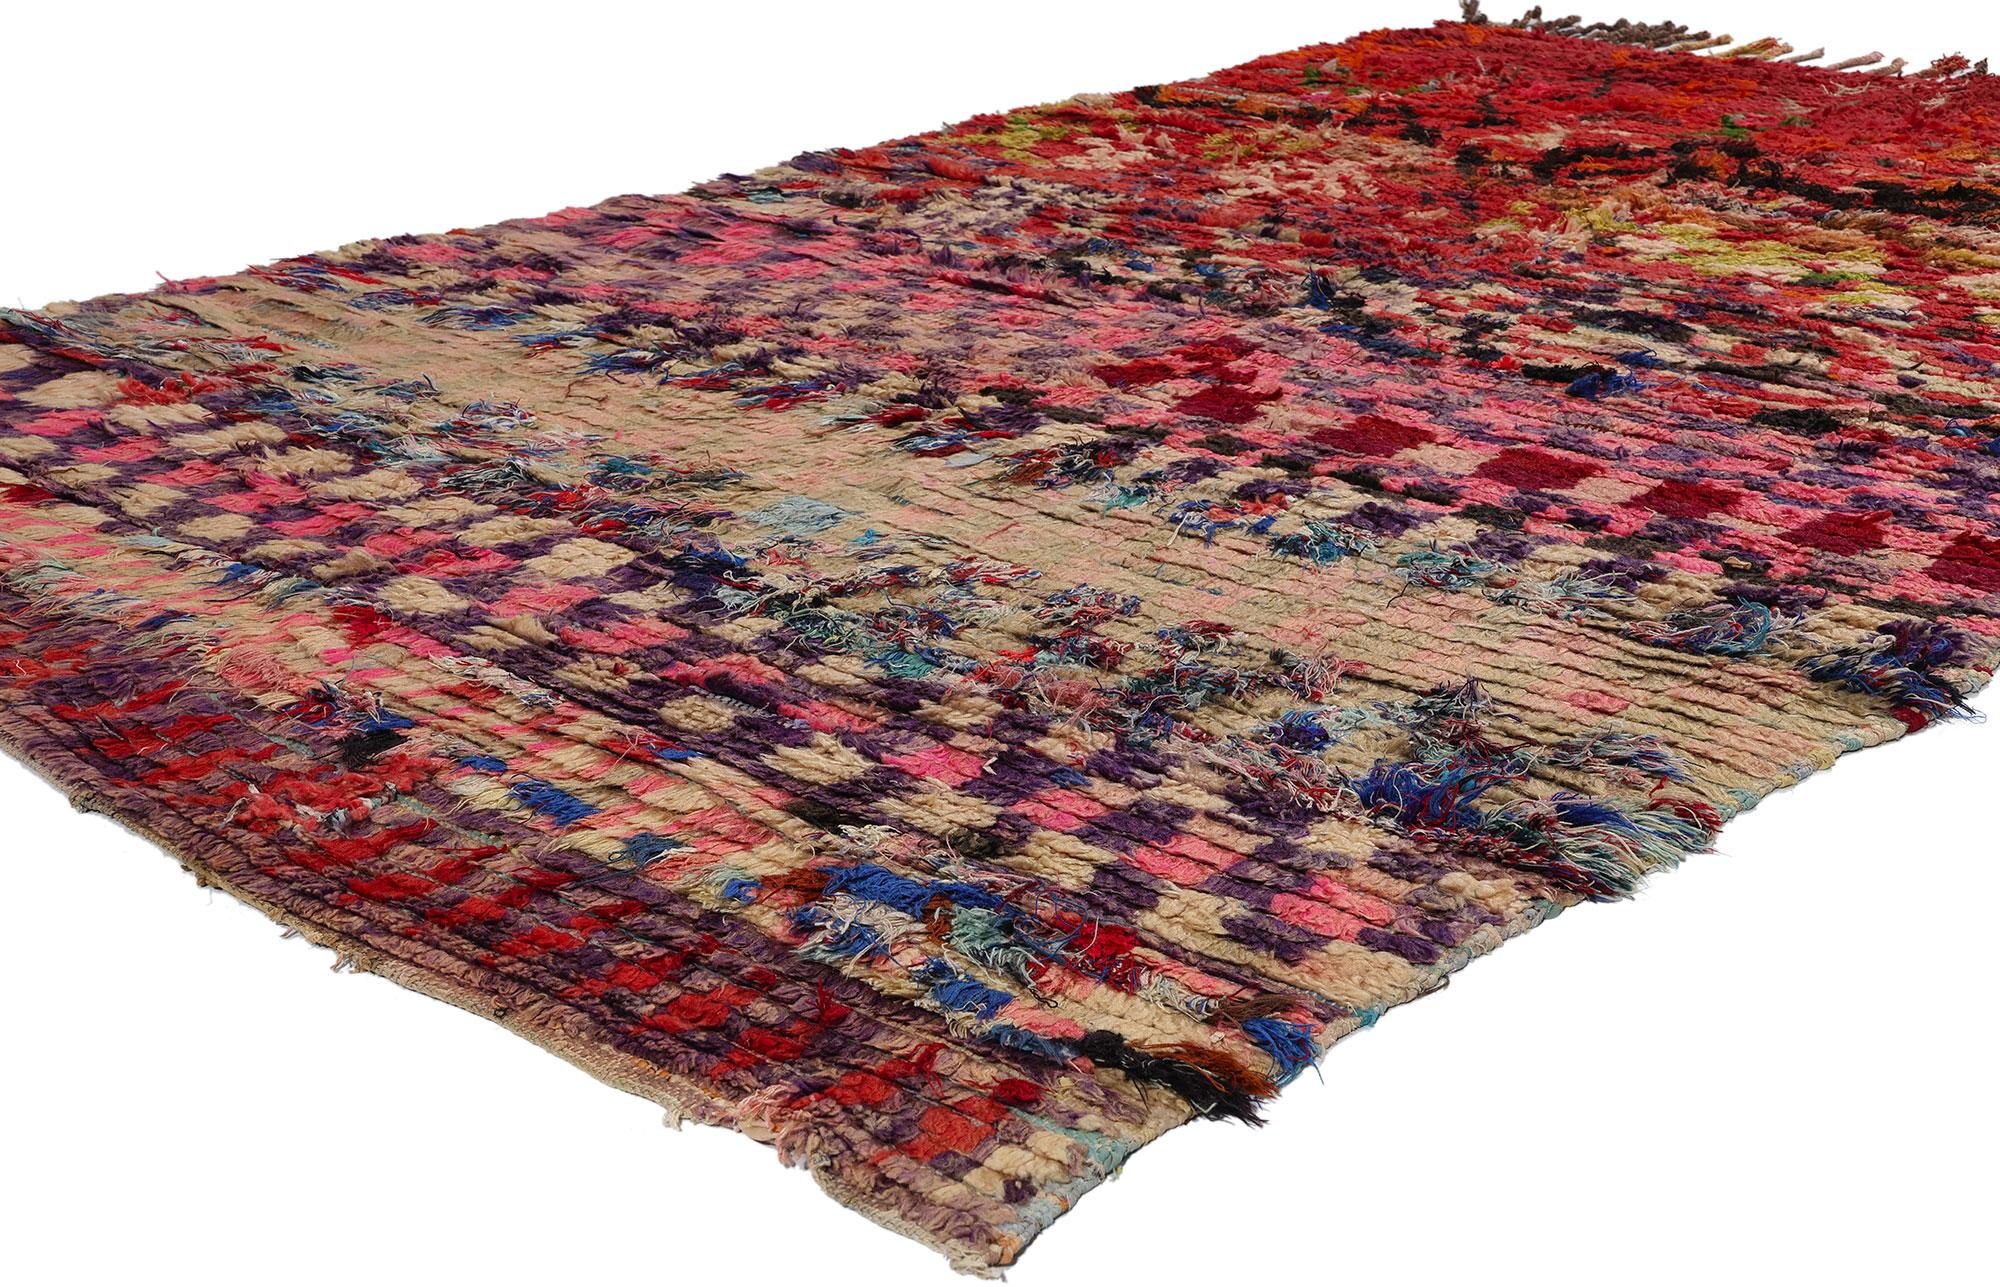 21816 Vintage Boucherouite Boujad Moroccan Rag Rug, 05'00 x 08'05. Celebrate the vibrant spirit of Boujad Boucherouite rugs, originating from the lively city of Boujad in the Khouribga region. These Moroccan rugs are cherished for their eccentric